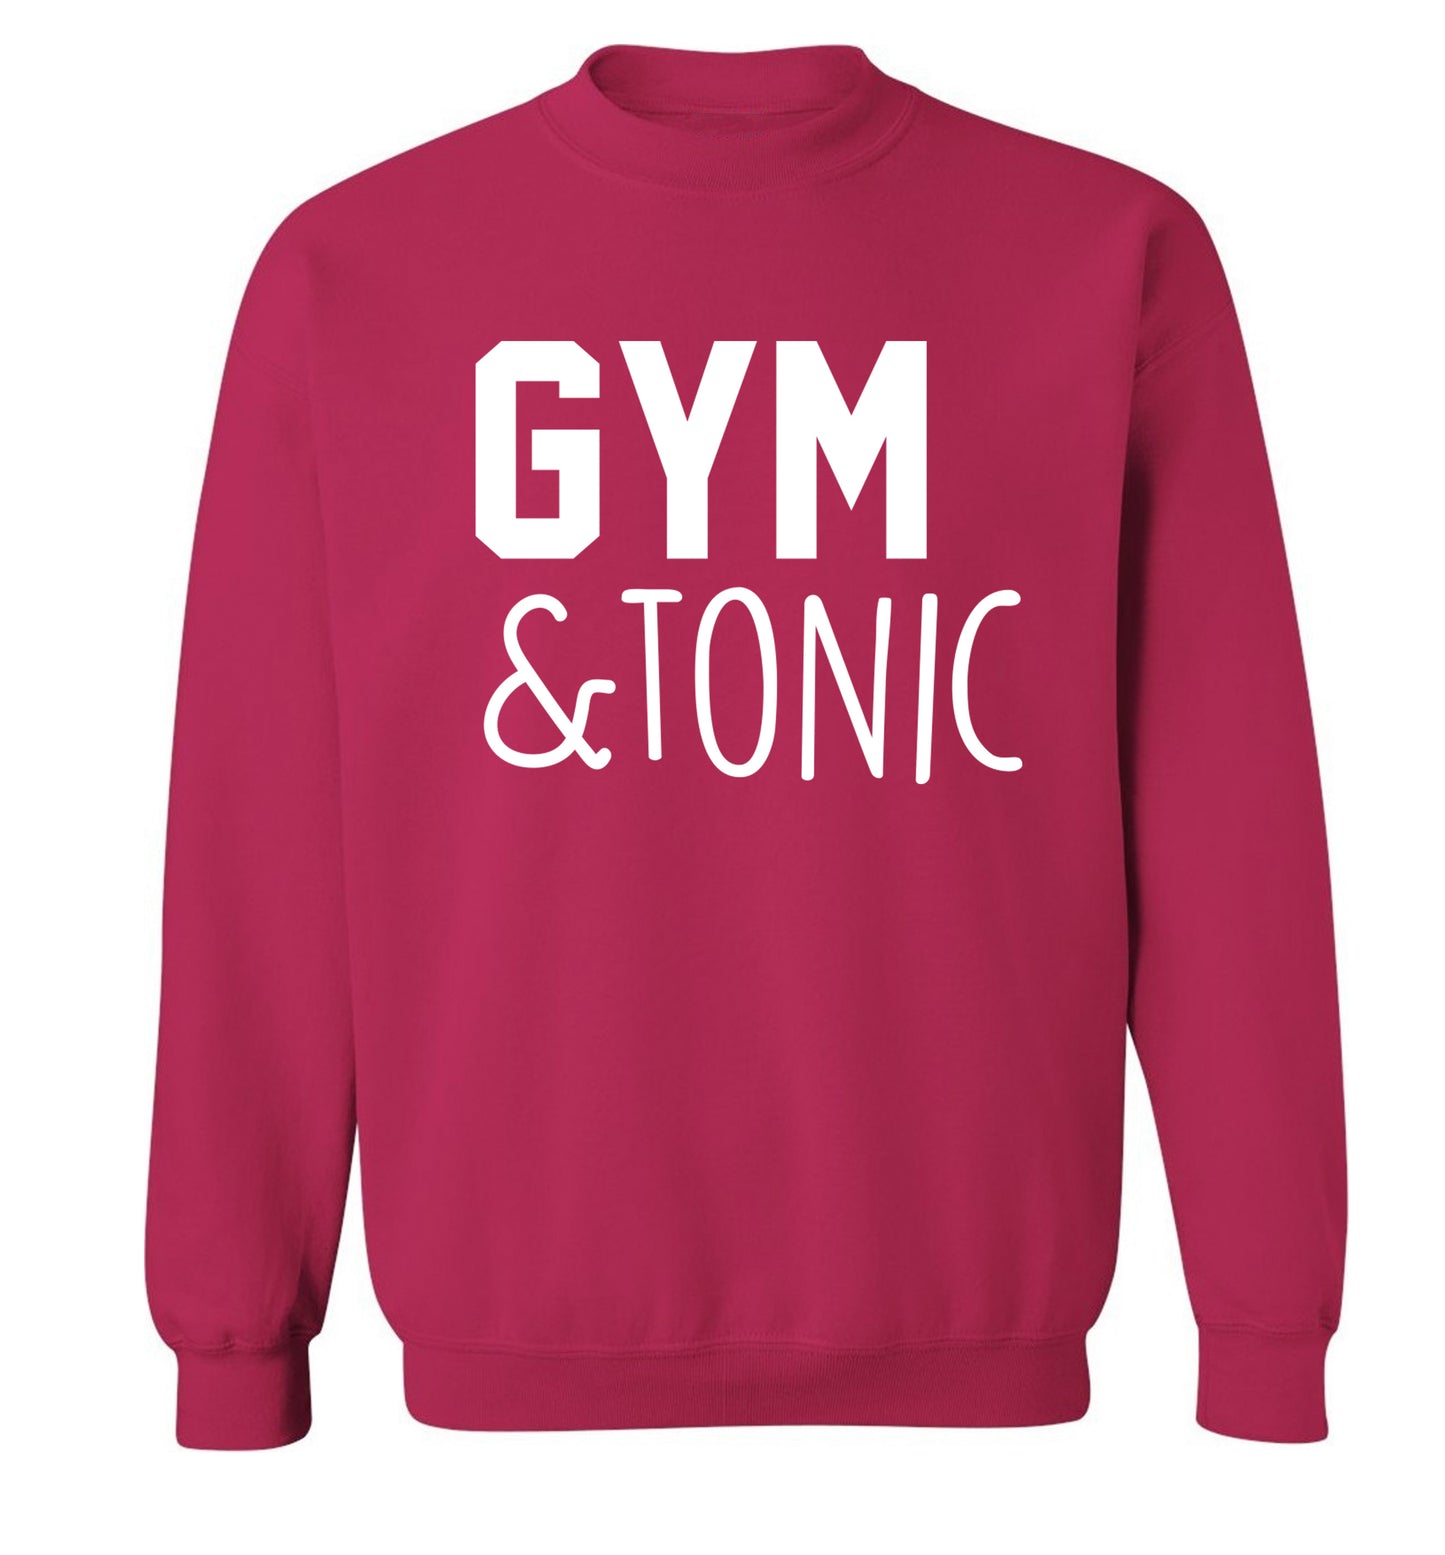 Gym and tonic Adult's unisex pink Sweater 2XL